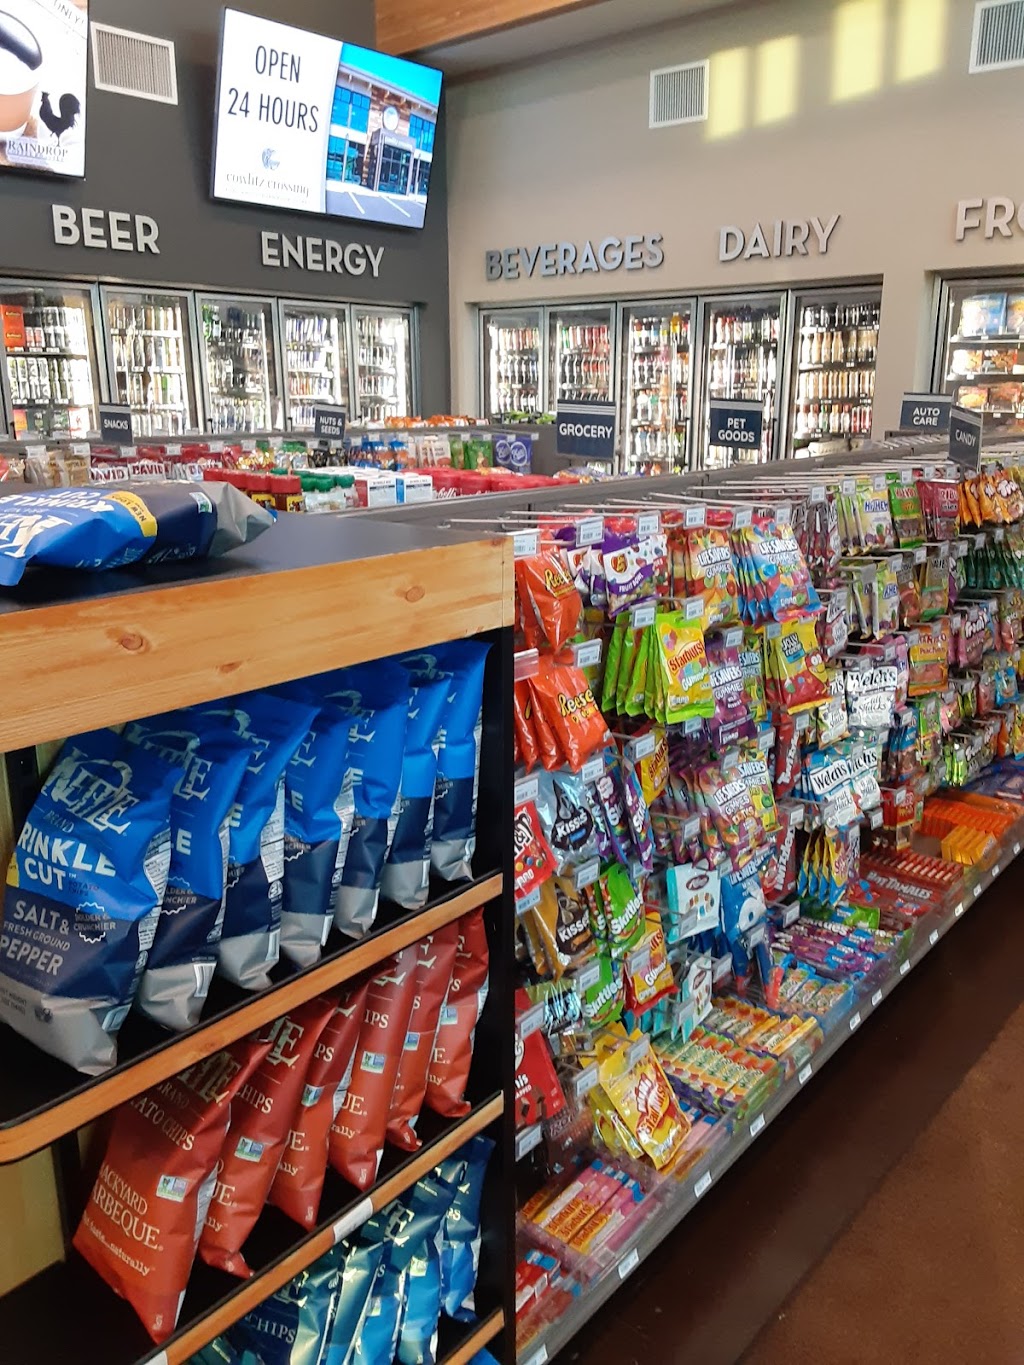 Cowlitz Crossing - Fuel And Convenience Store | 31801 NW 31st Ave, Ridgefield, WA 98642 | Phone: (360) 887-6585